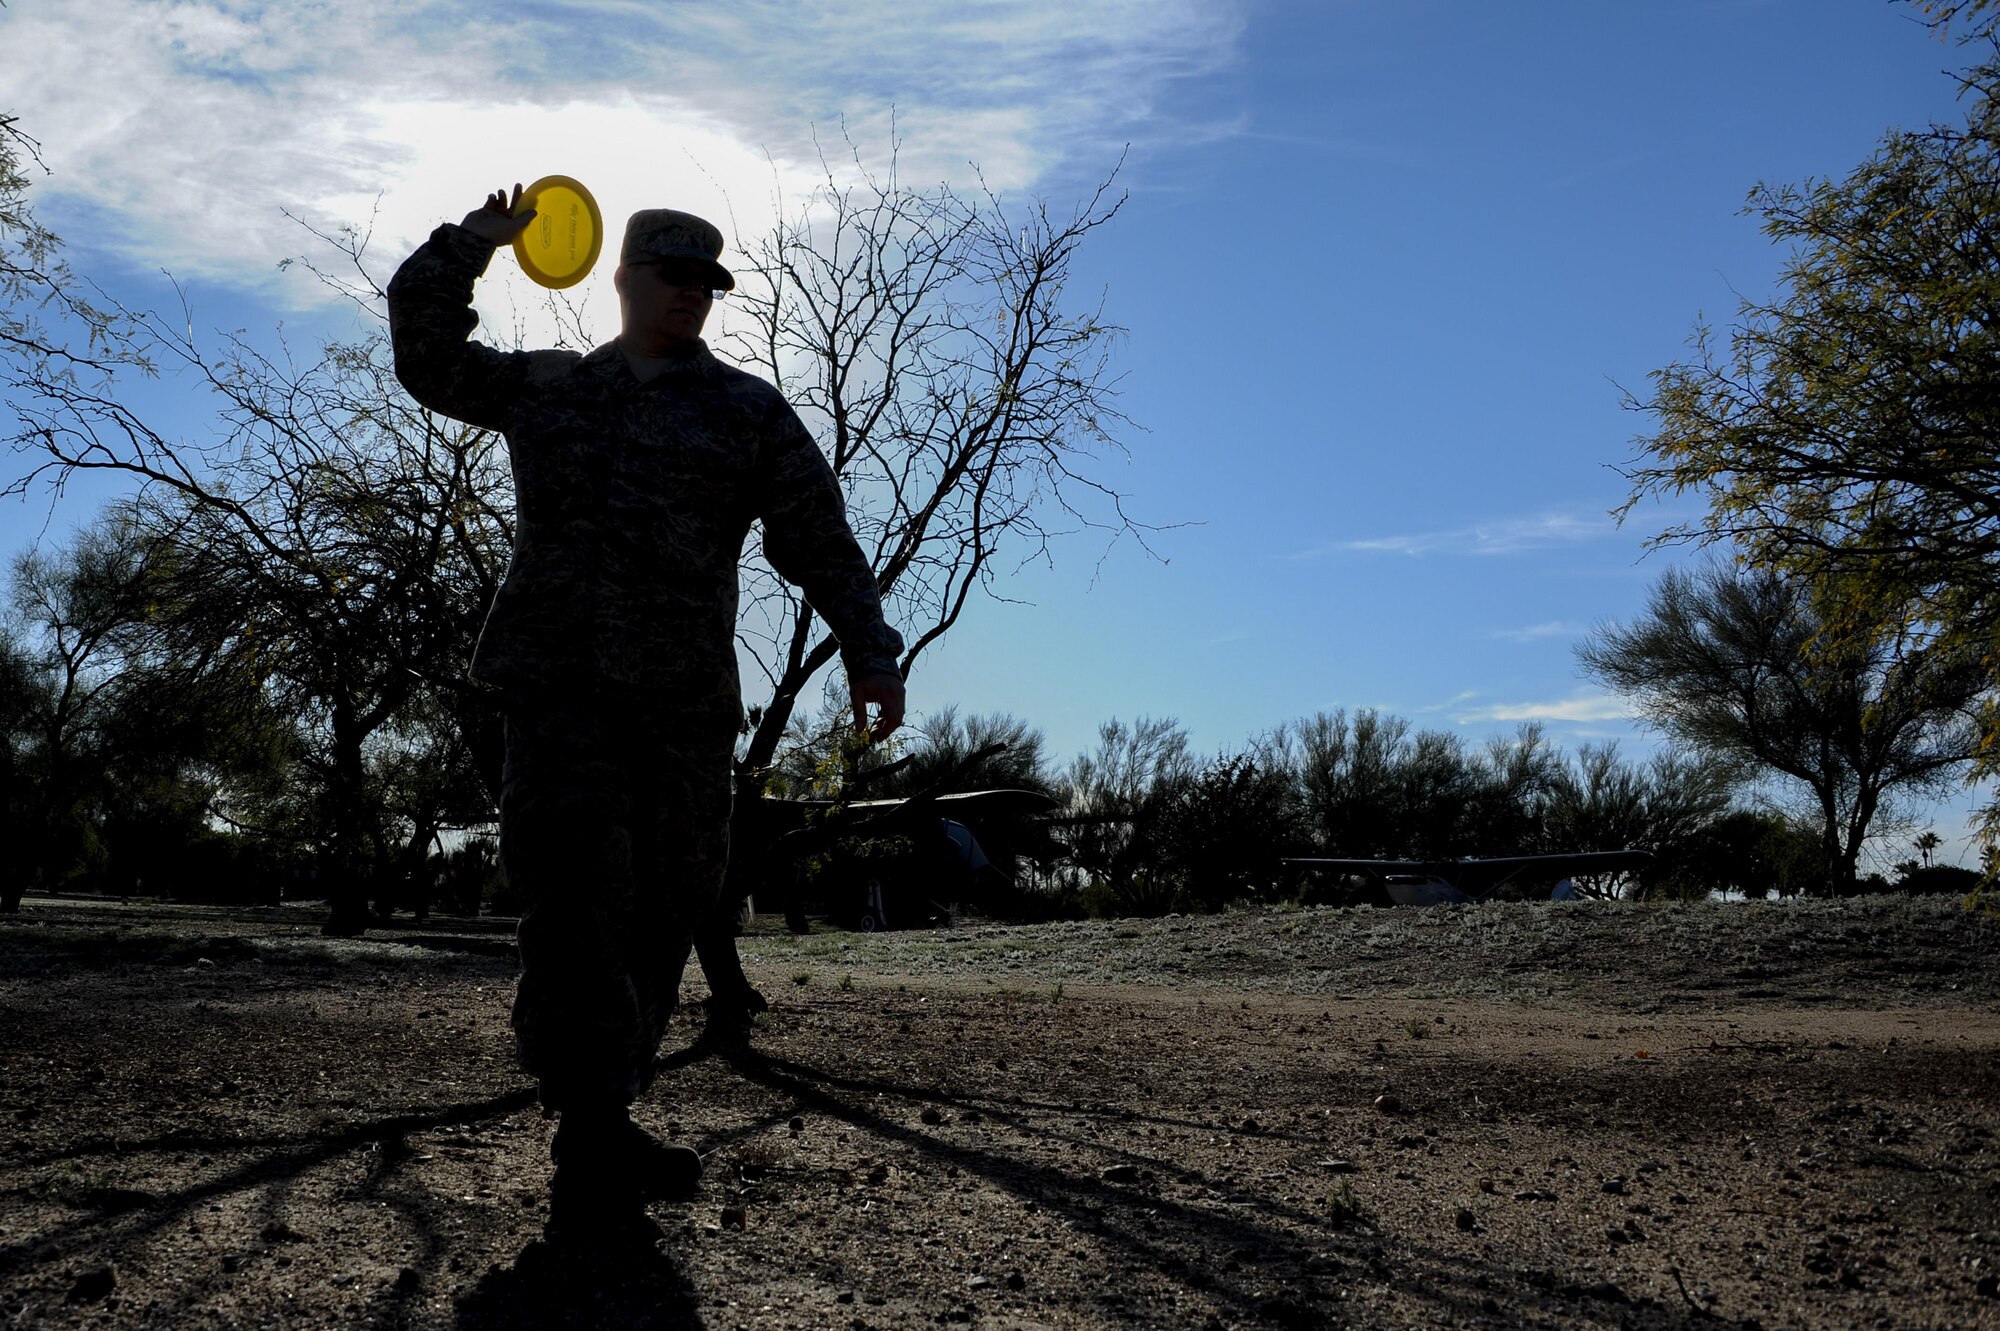 U.S. Air Force Tech. Sgt. Donald Brown, 355th Electronic Maintenance Squadron C-130 dock coordinator, lines up an overhand disc golf shot at Heritage Park near the future disc golf course site at Davis-Monthan Air Force Base, Ariz., Feb. 10, 2016. Doub and Tech. Sgt. Donald Brown, 355th Electronic Maintenance Squadron C-130 dock coordinator, designed a disc golf course and proposed their idea during a Innovate DLT event. (U.S. Air Force photo by Airmen 1st Class Ashley N. Steffen/Released)